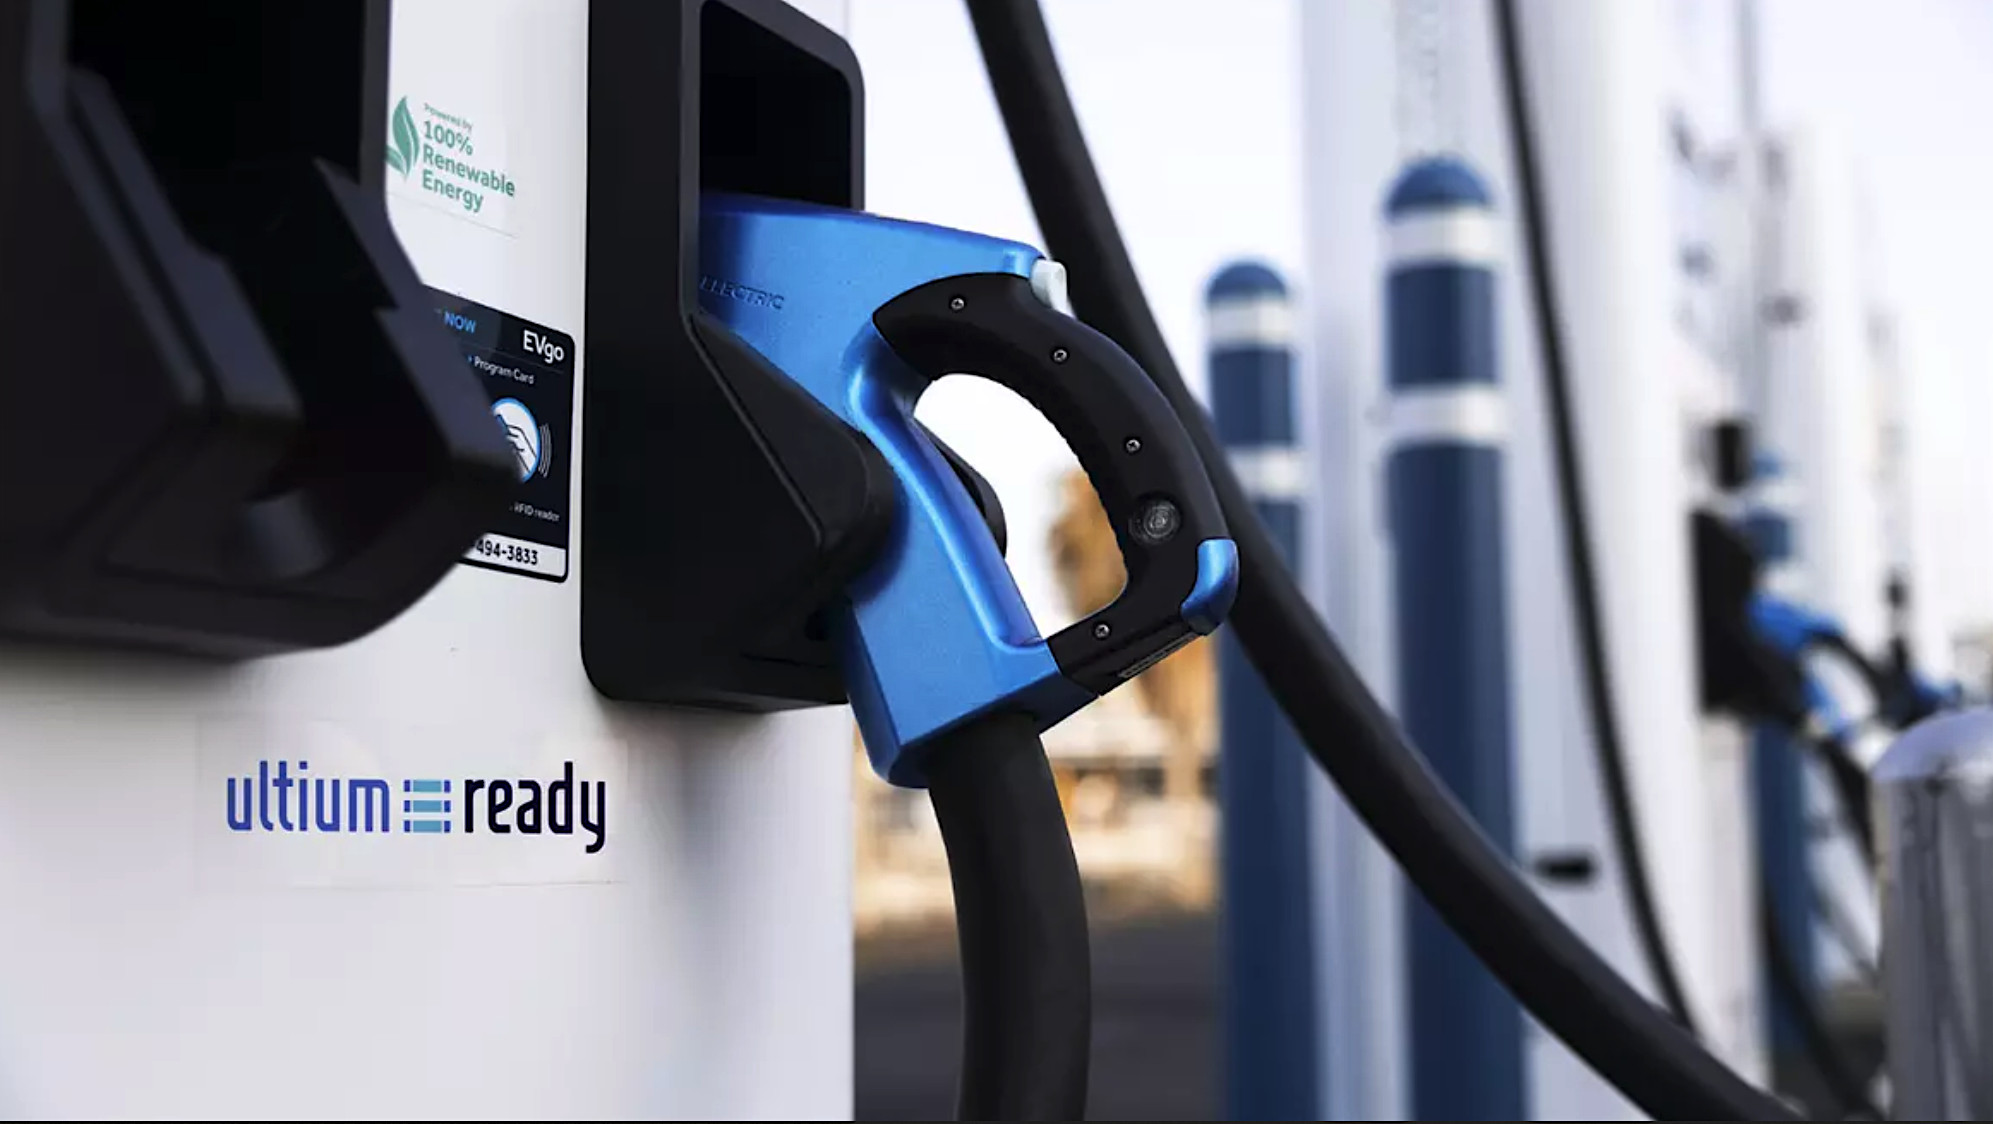 GM and EVgo step up fast-charging network to ease urban EV ownership, electric ride hailingGM and EVgo step up fast-charging network to ease urban EV ownership, electric ride hailing